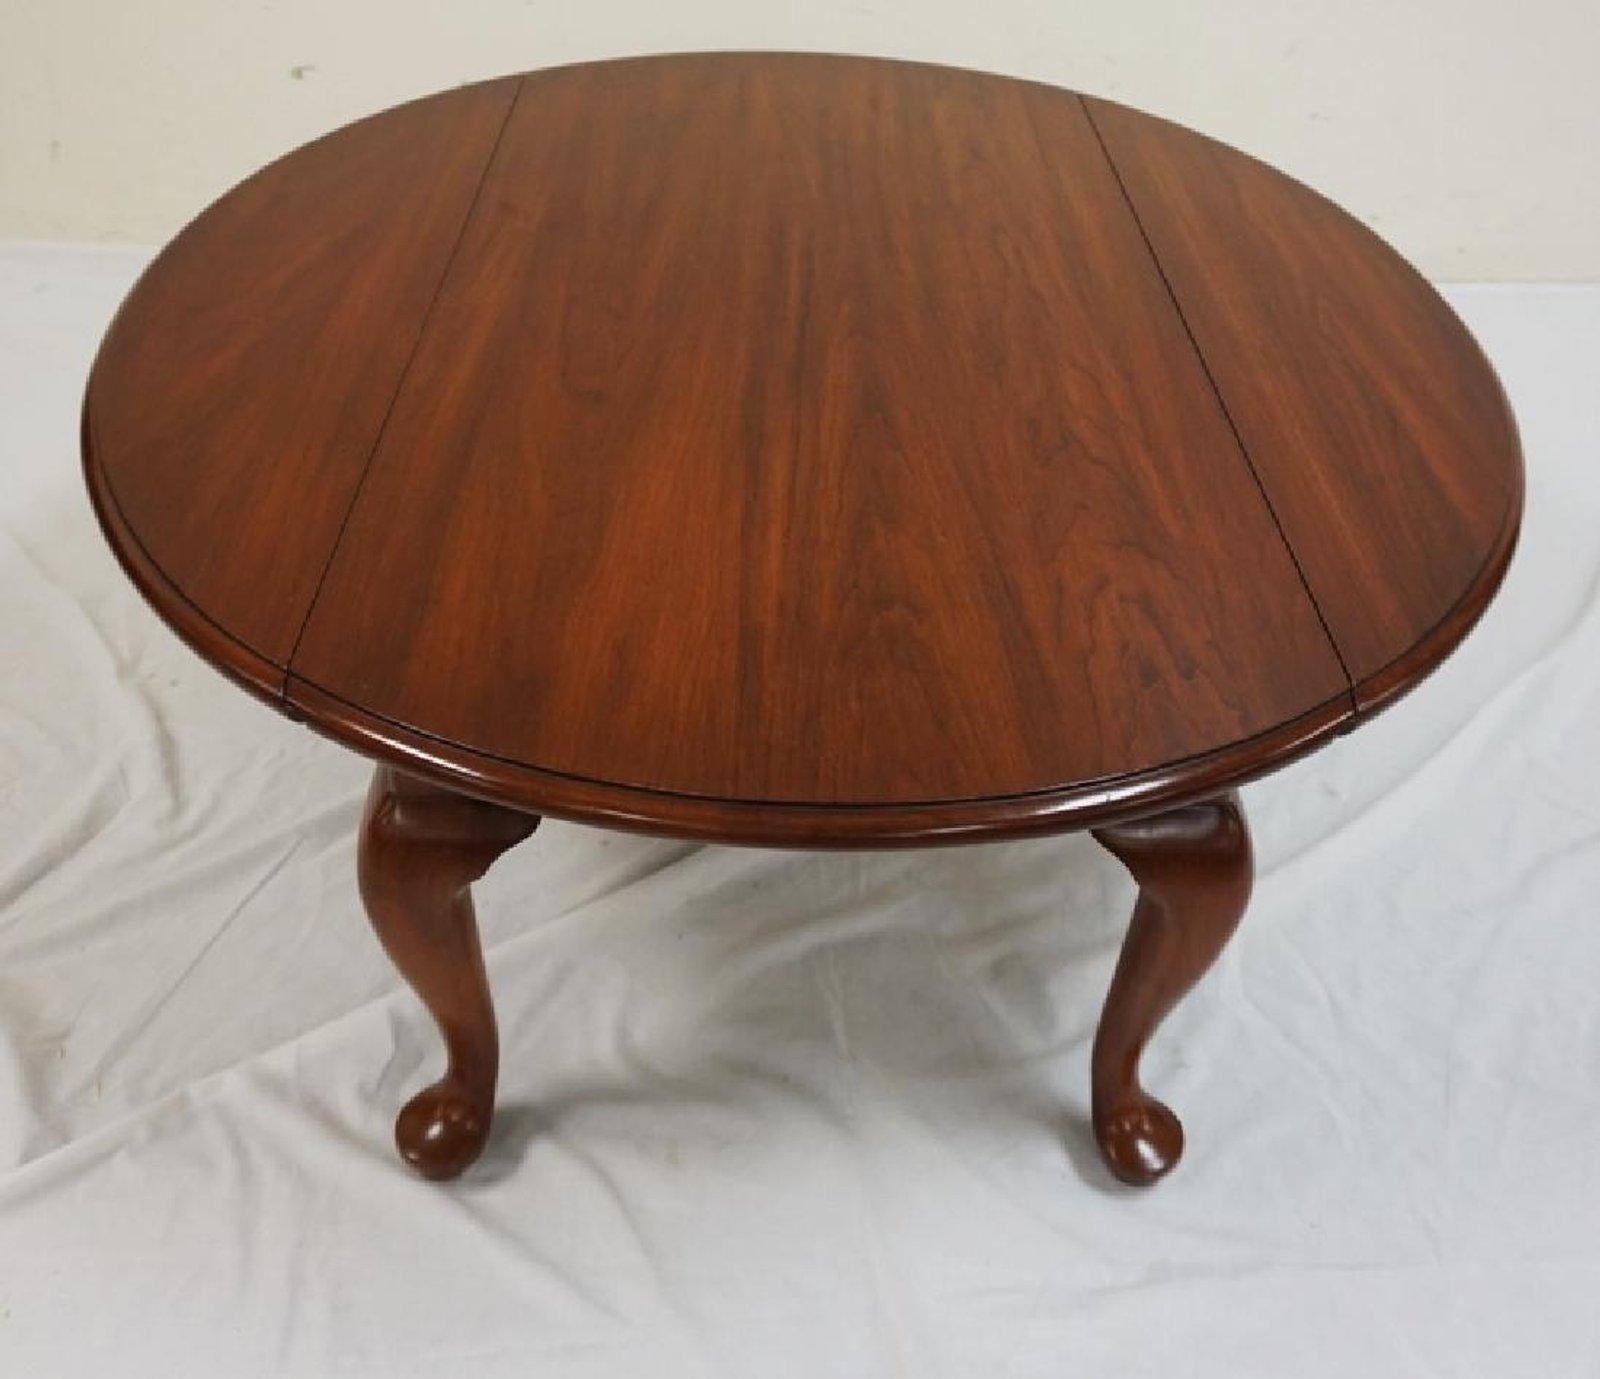 Henkel Harris Virginia galleries drop leaf coffee or end table 41.5 inches with leaves open up, 16.5 inches height. Wild cherry wood. Gorgeous rich finish, simple, sensuous line, all American material, just a classic, timeless, handcrafted